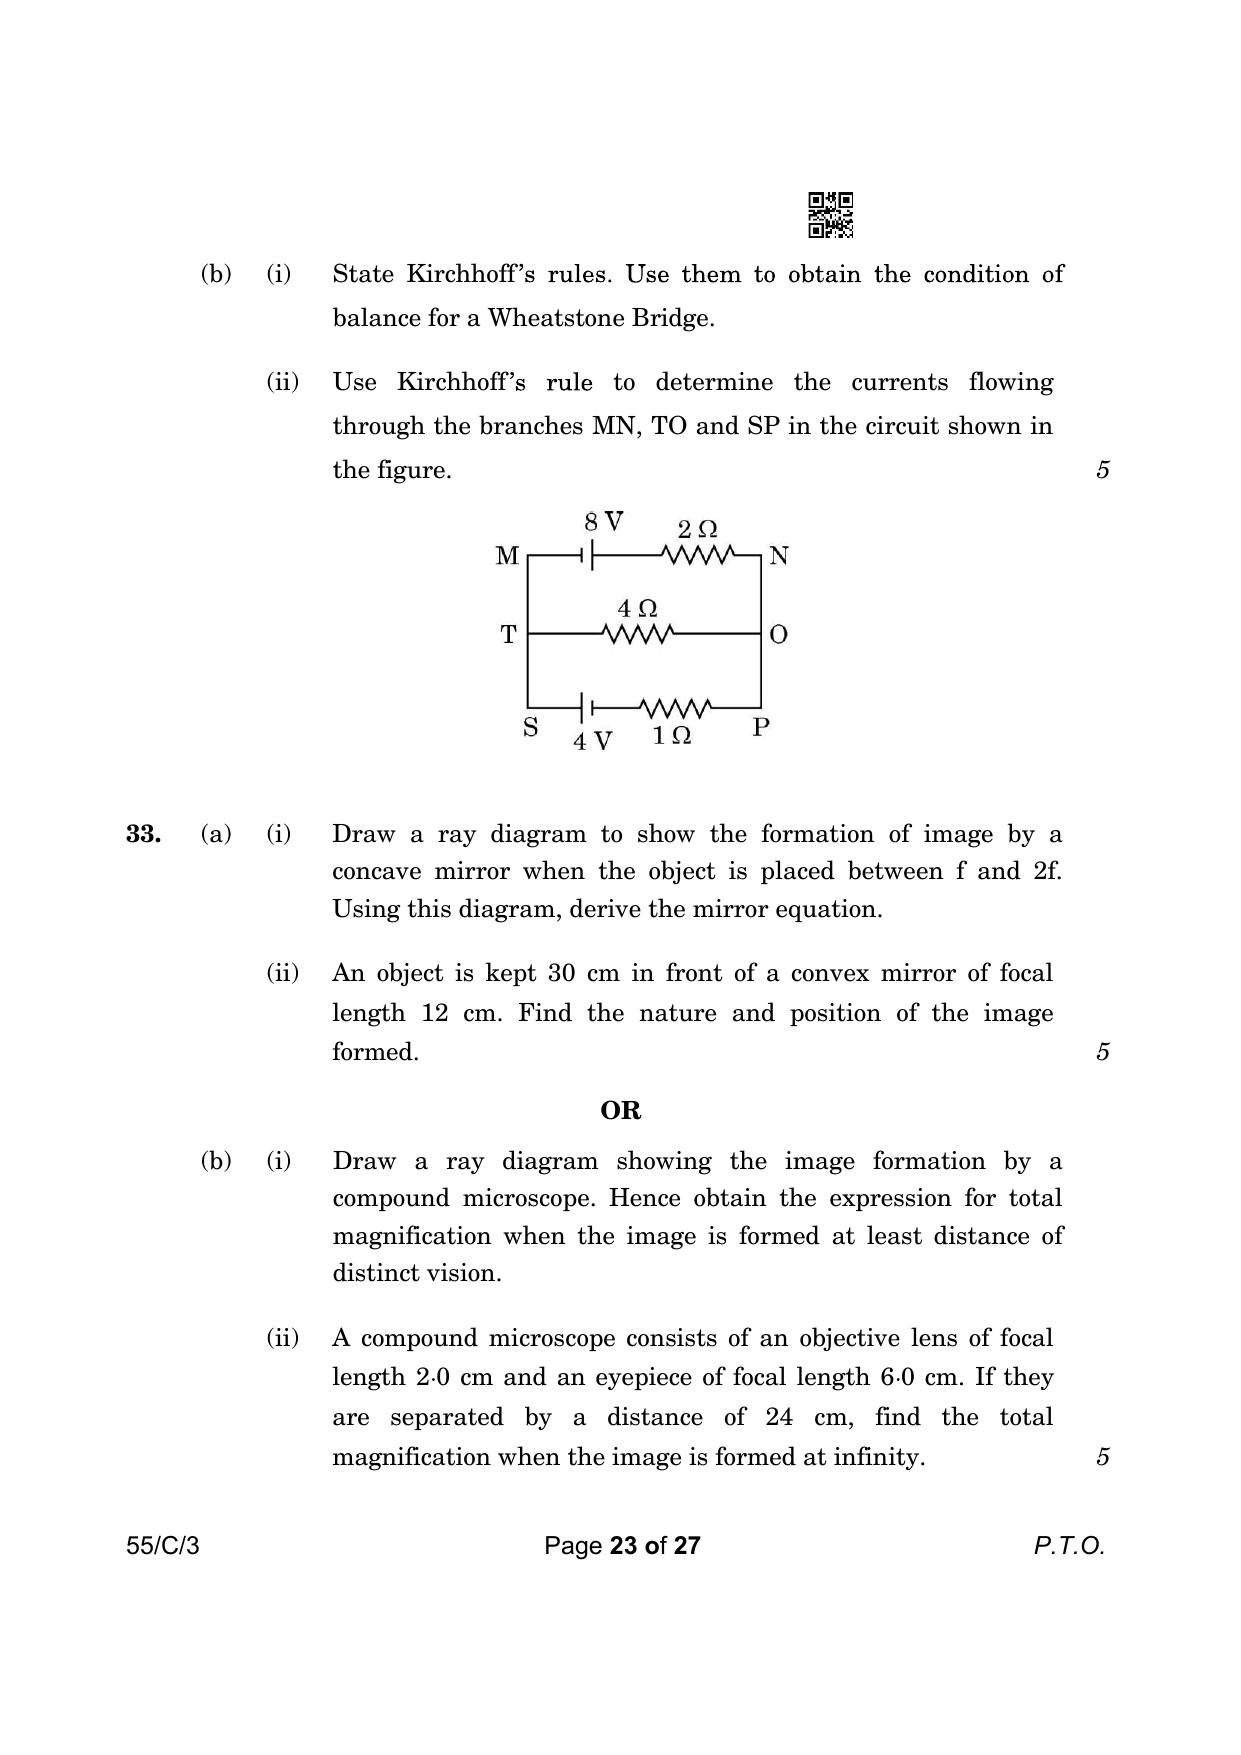 CBSE Class 12 55-3 Physics 2023 (Compartment) Question Paper - Page 23